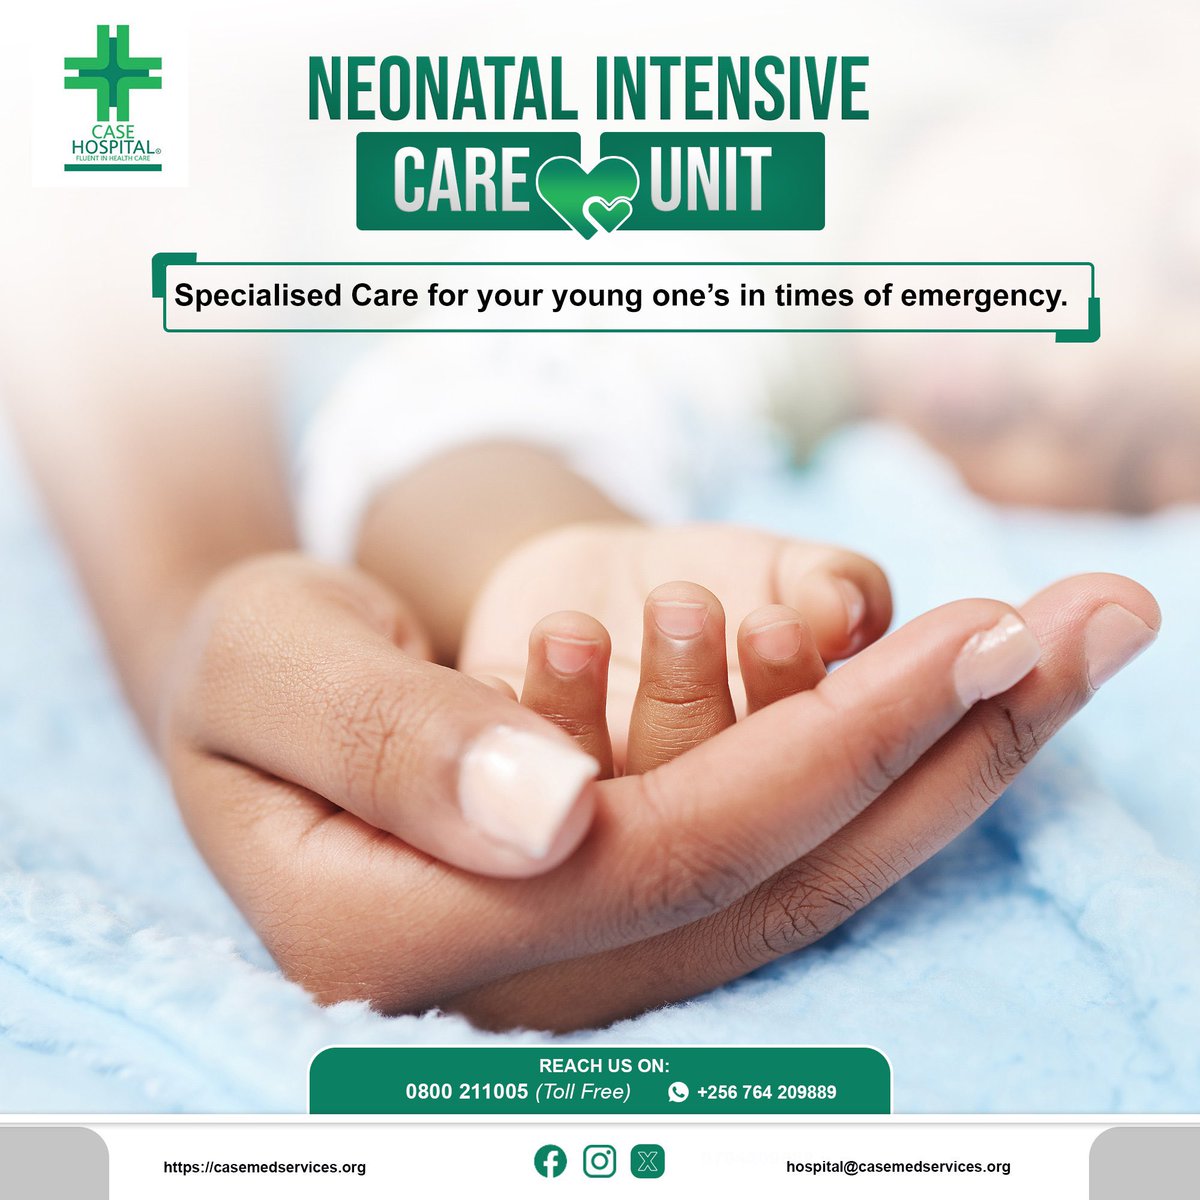 At Case  Hospital, we ensure young patients receive top-notch medical care. That's why our Maternity Unit is equipped with a complete Neonatal Intensive Care Unit to provide immediate support for your baby in emergencies.  
#pregnancyjourney